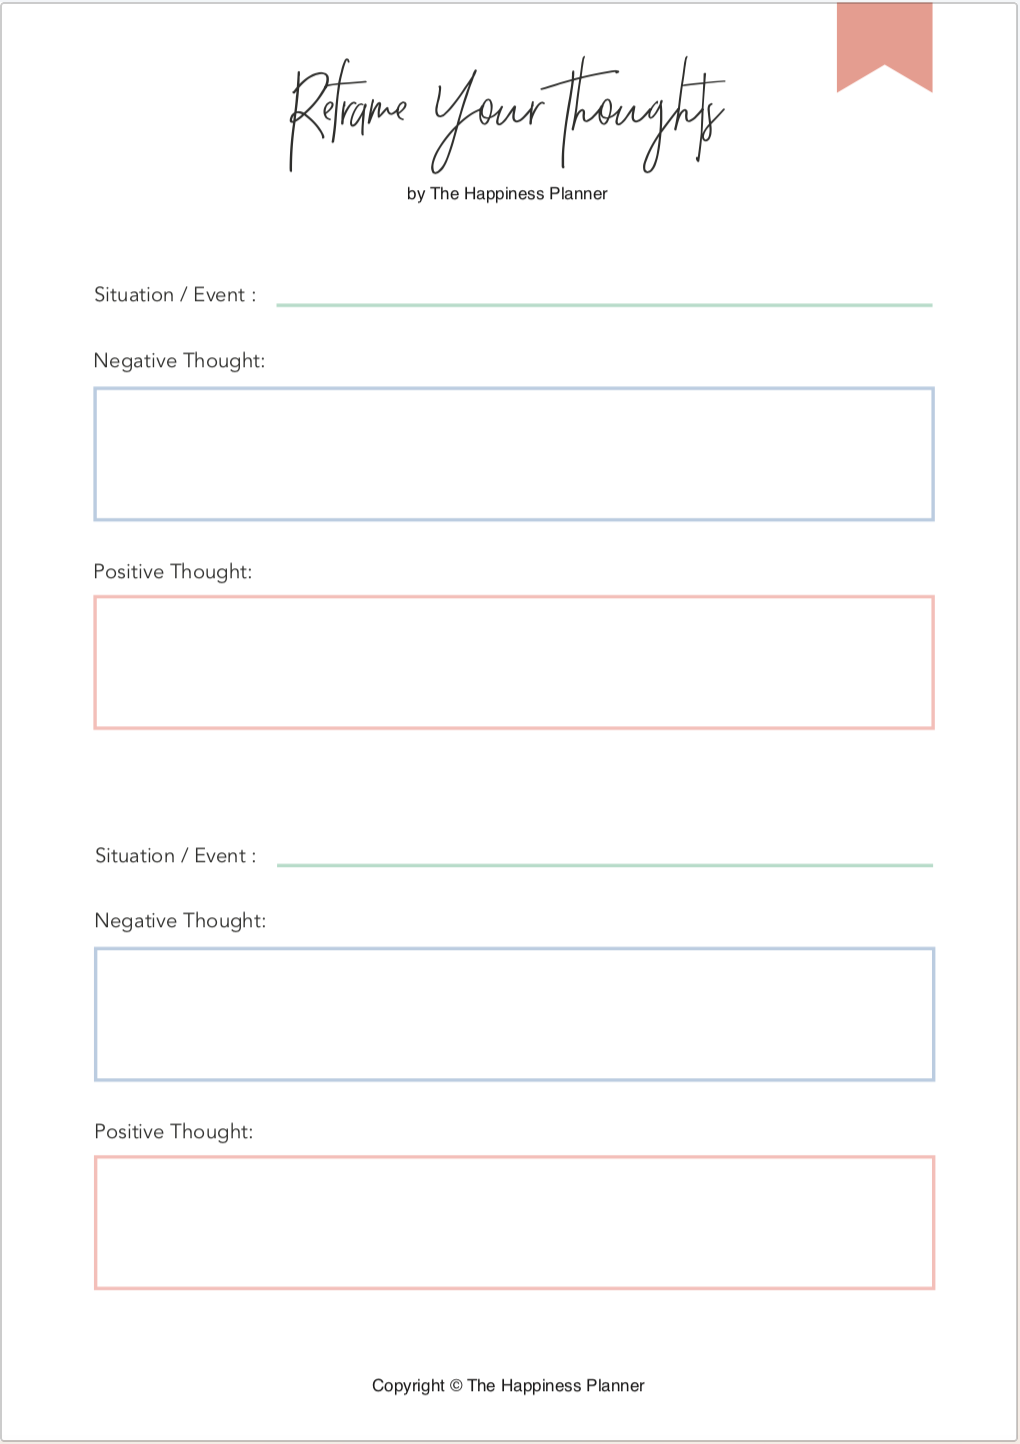 Printables: #Perspective - The Happiness Planner®